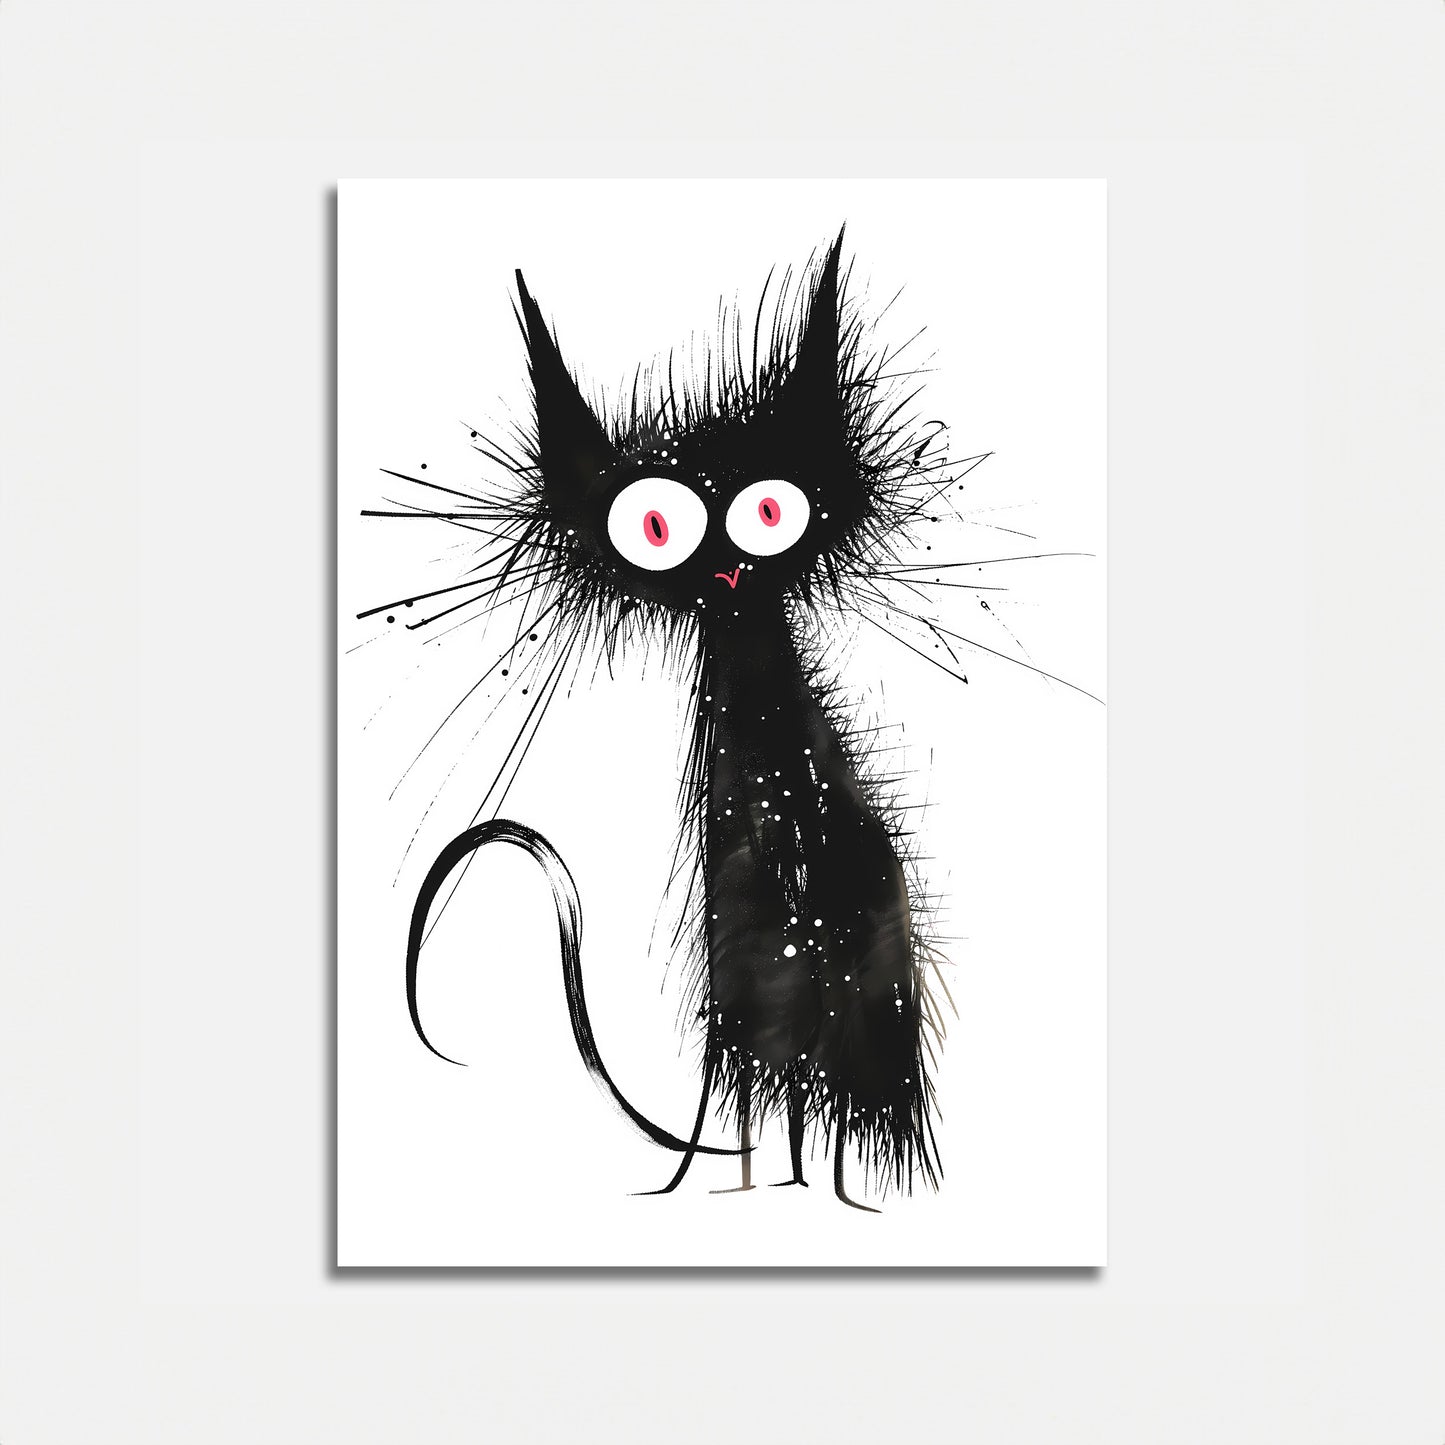 An artistic illustration of a black cat with large eyes on a white background.